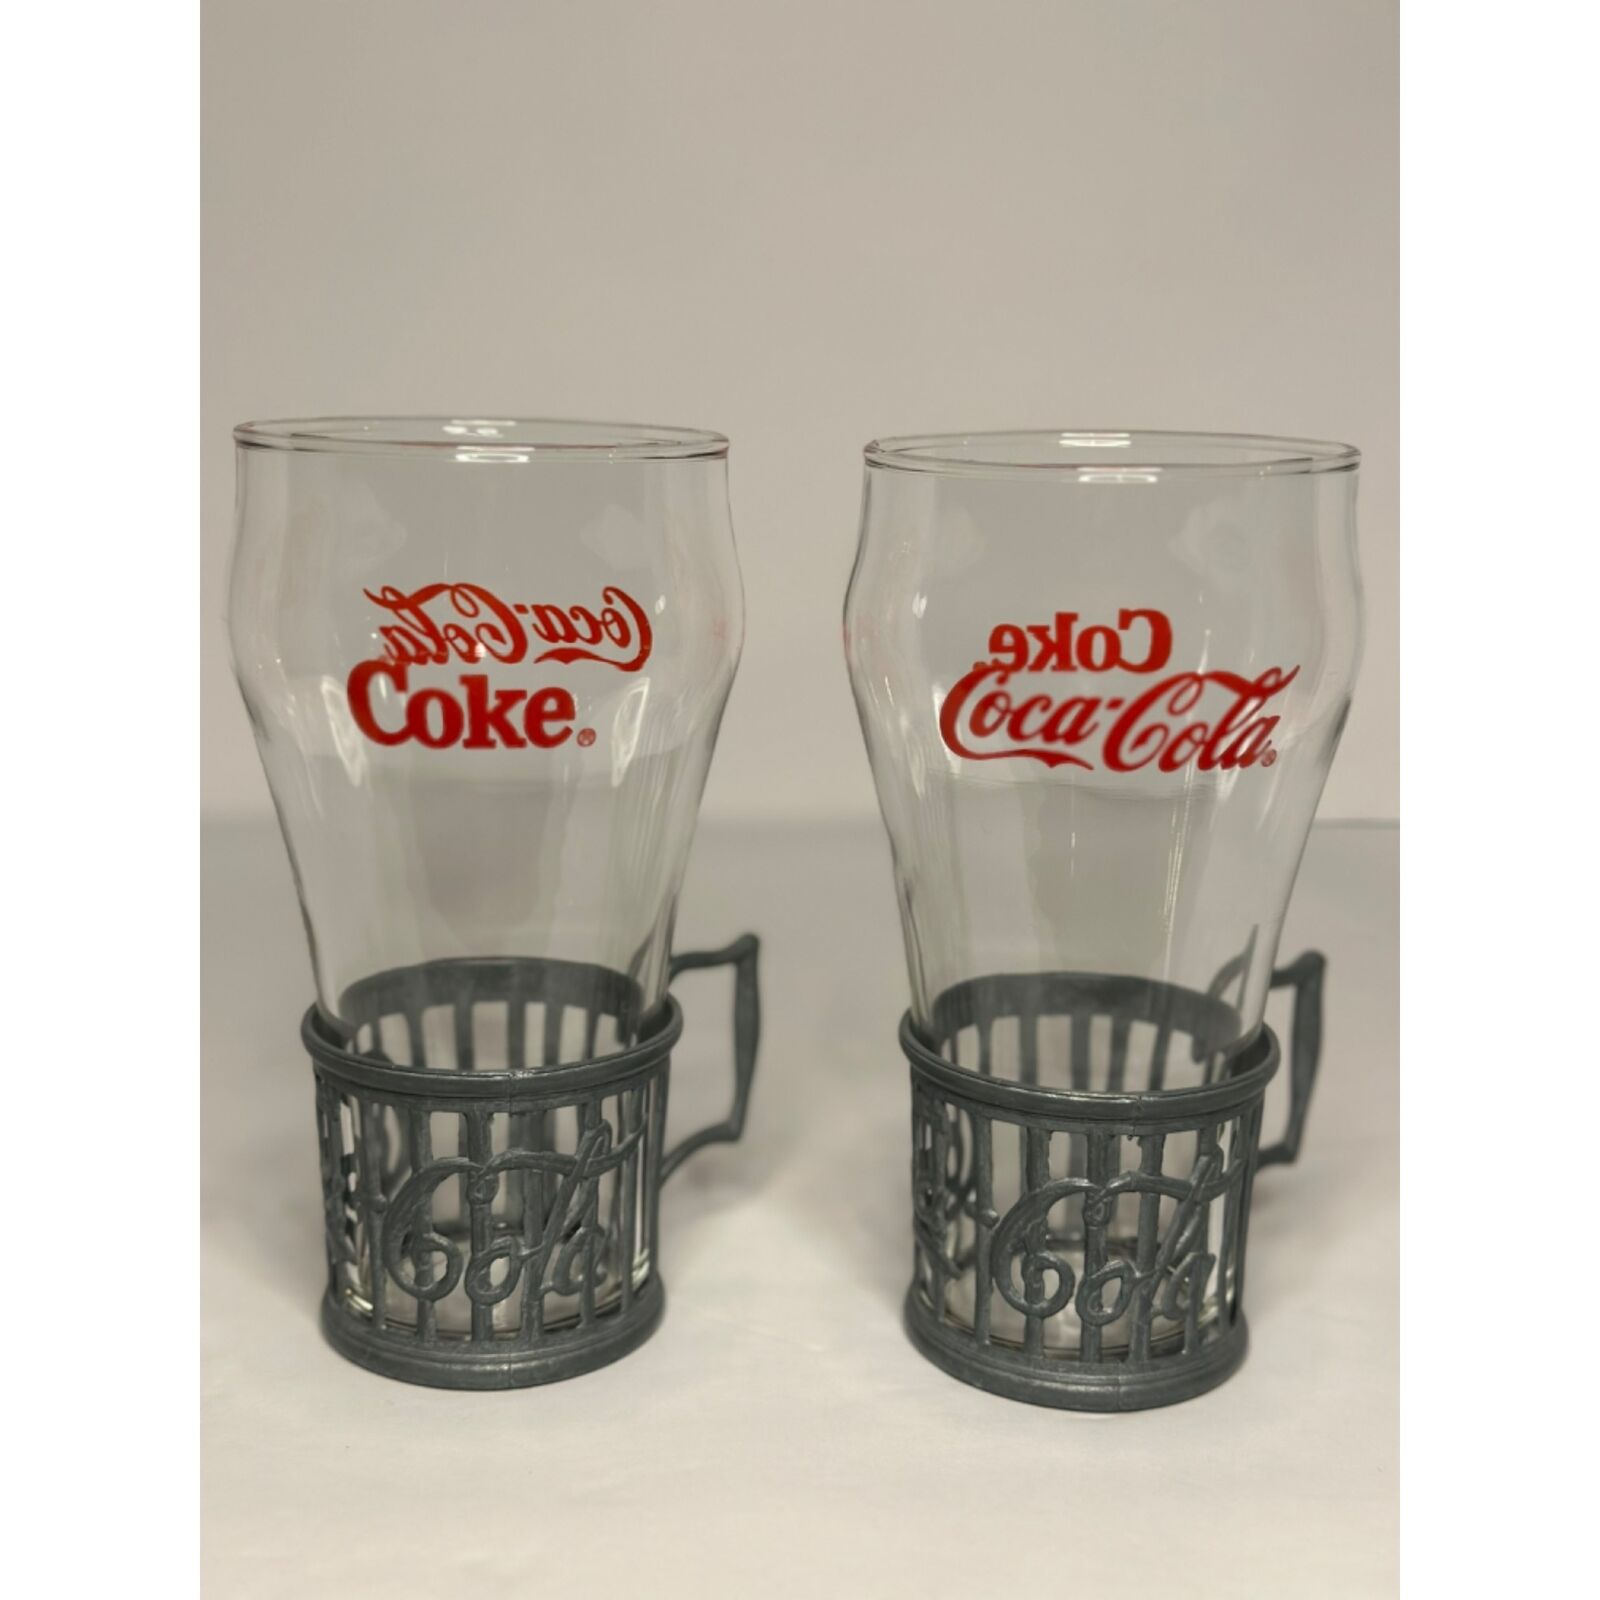 VTG 1985 Coca Cola Coke Glasses with Pewter Holder Set of 2 Retro Style Red